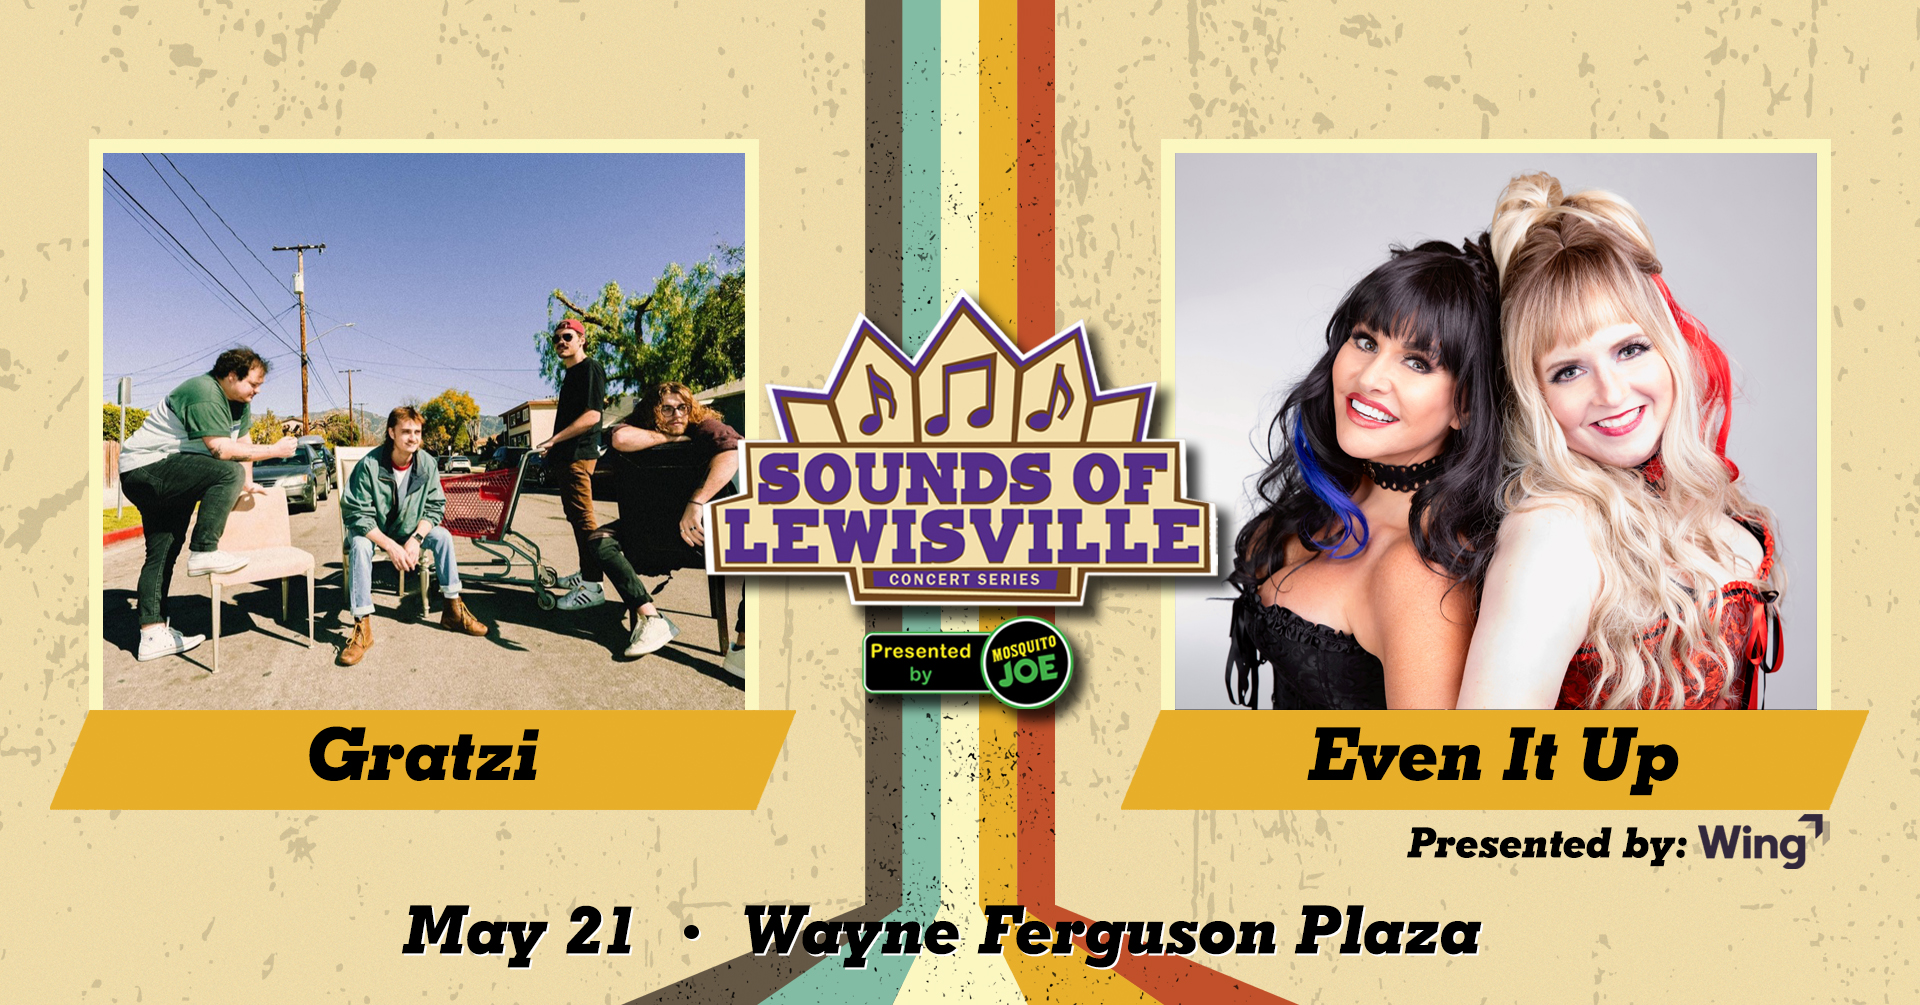 Sounds of Lewisville - May 21 concert